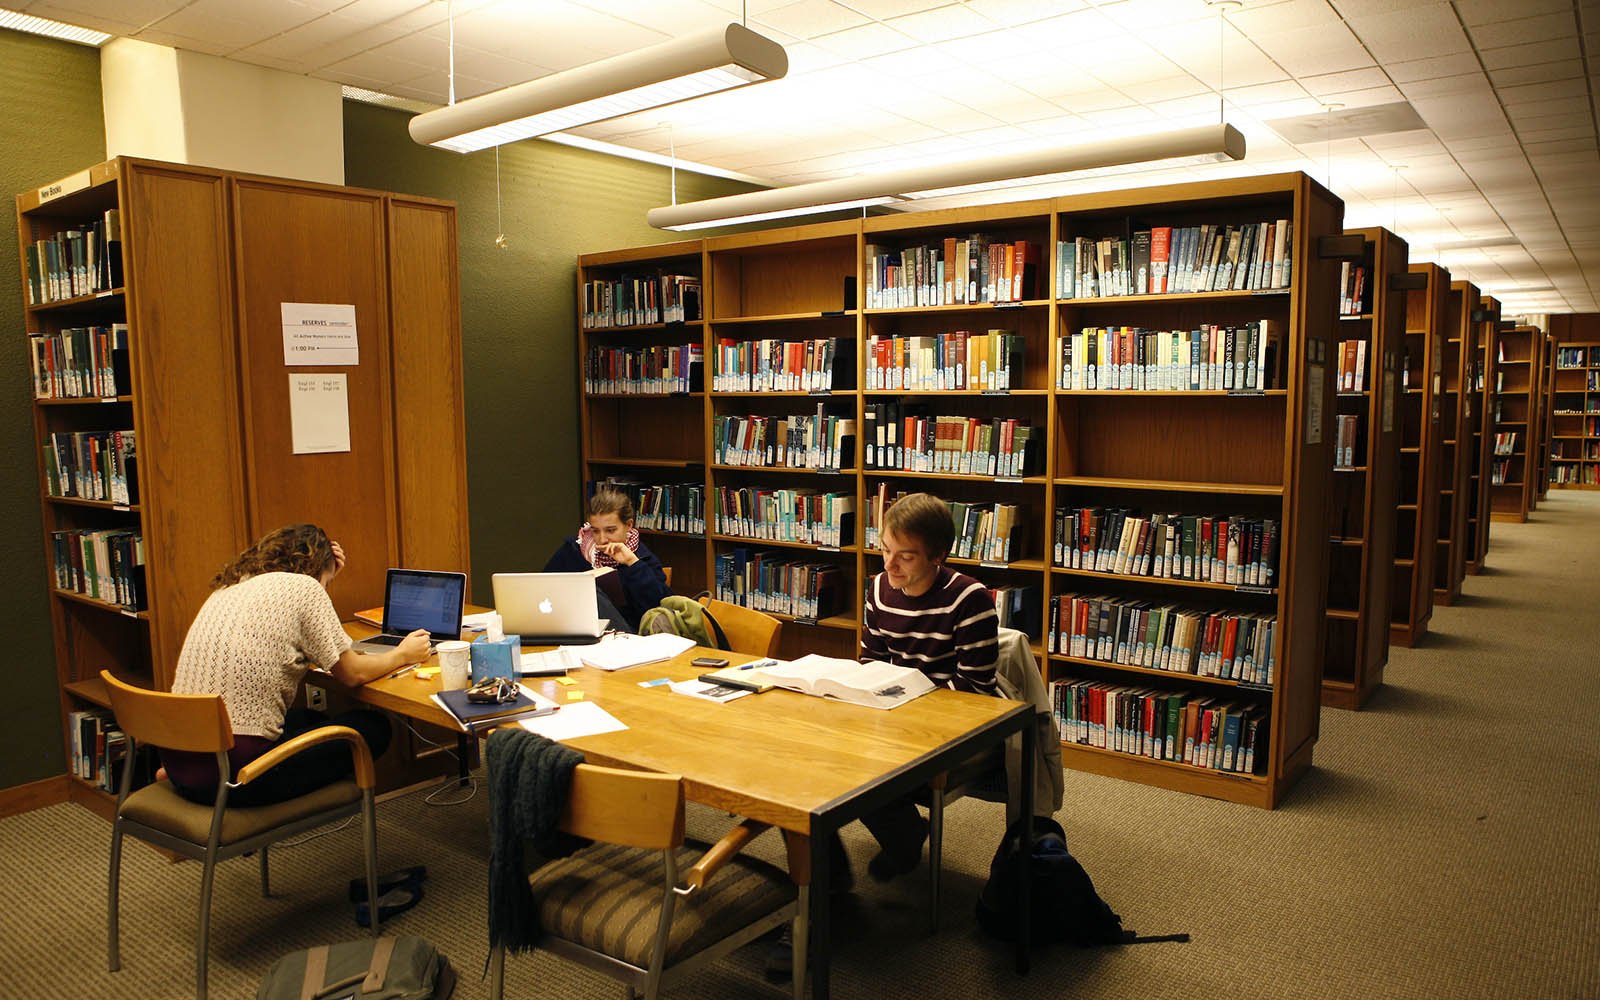 students at a table near book shelves